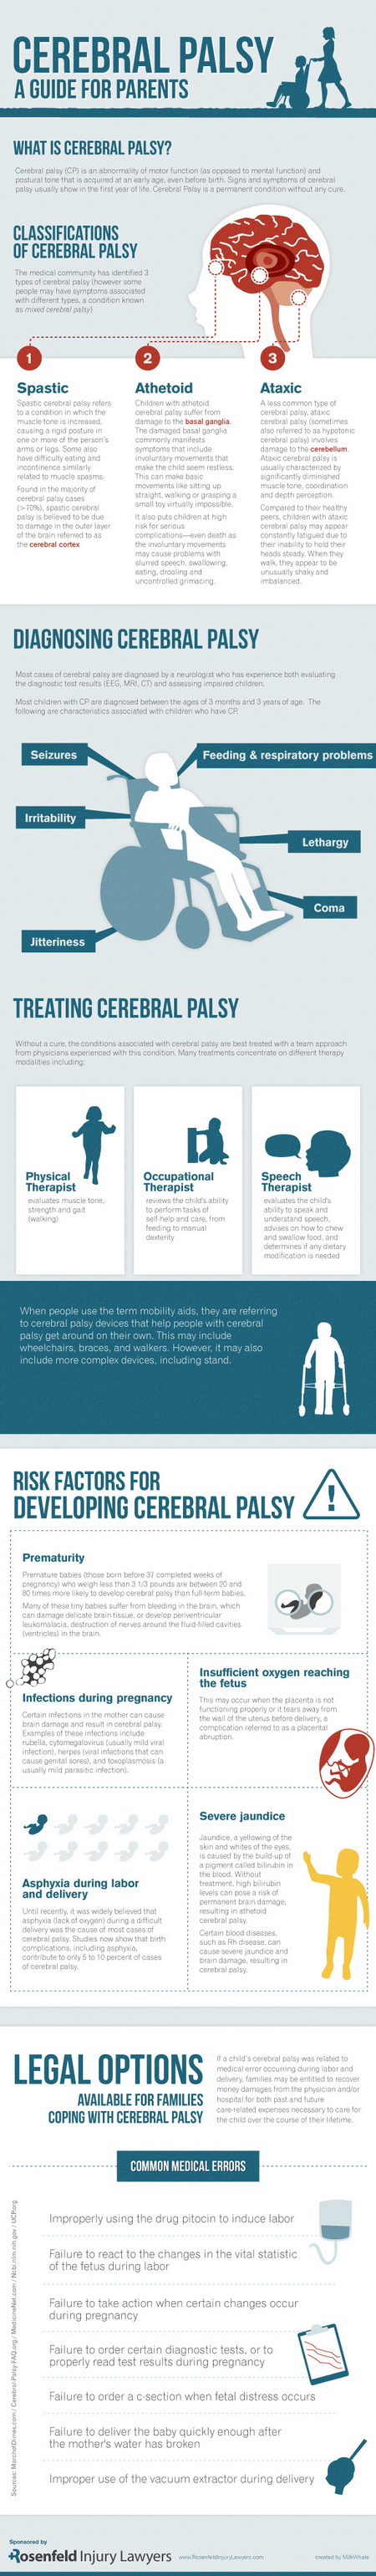 Thumbnail for Guide for Cerebral Palsy Infographic